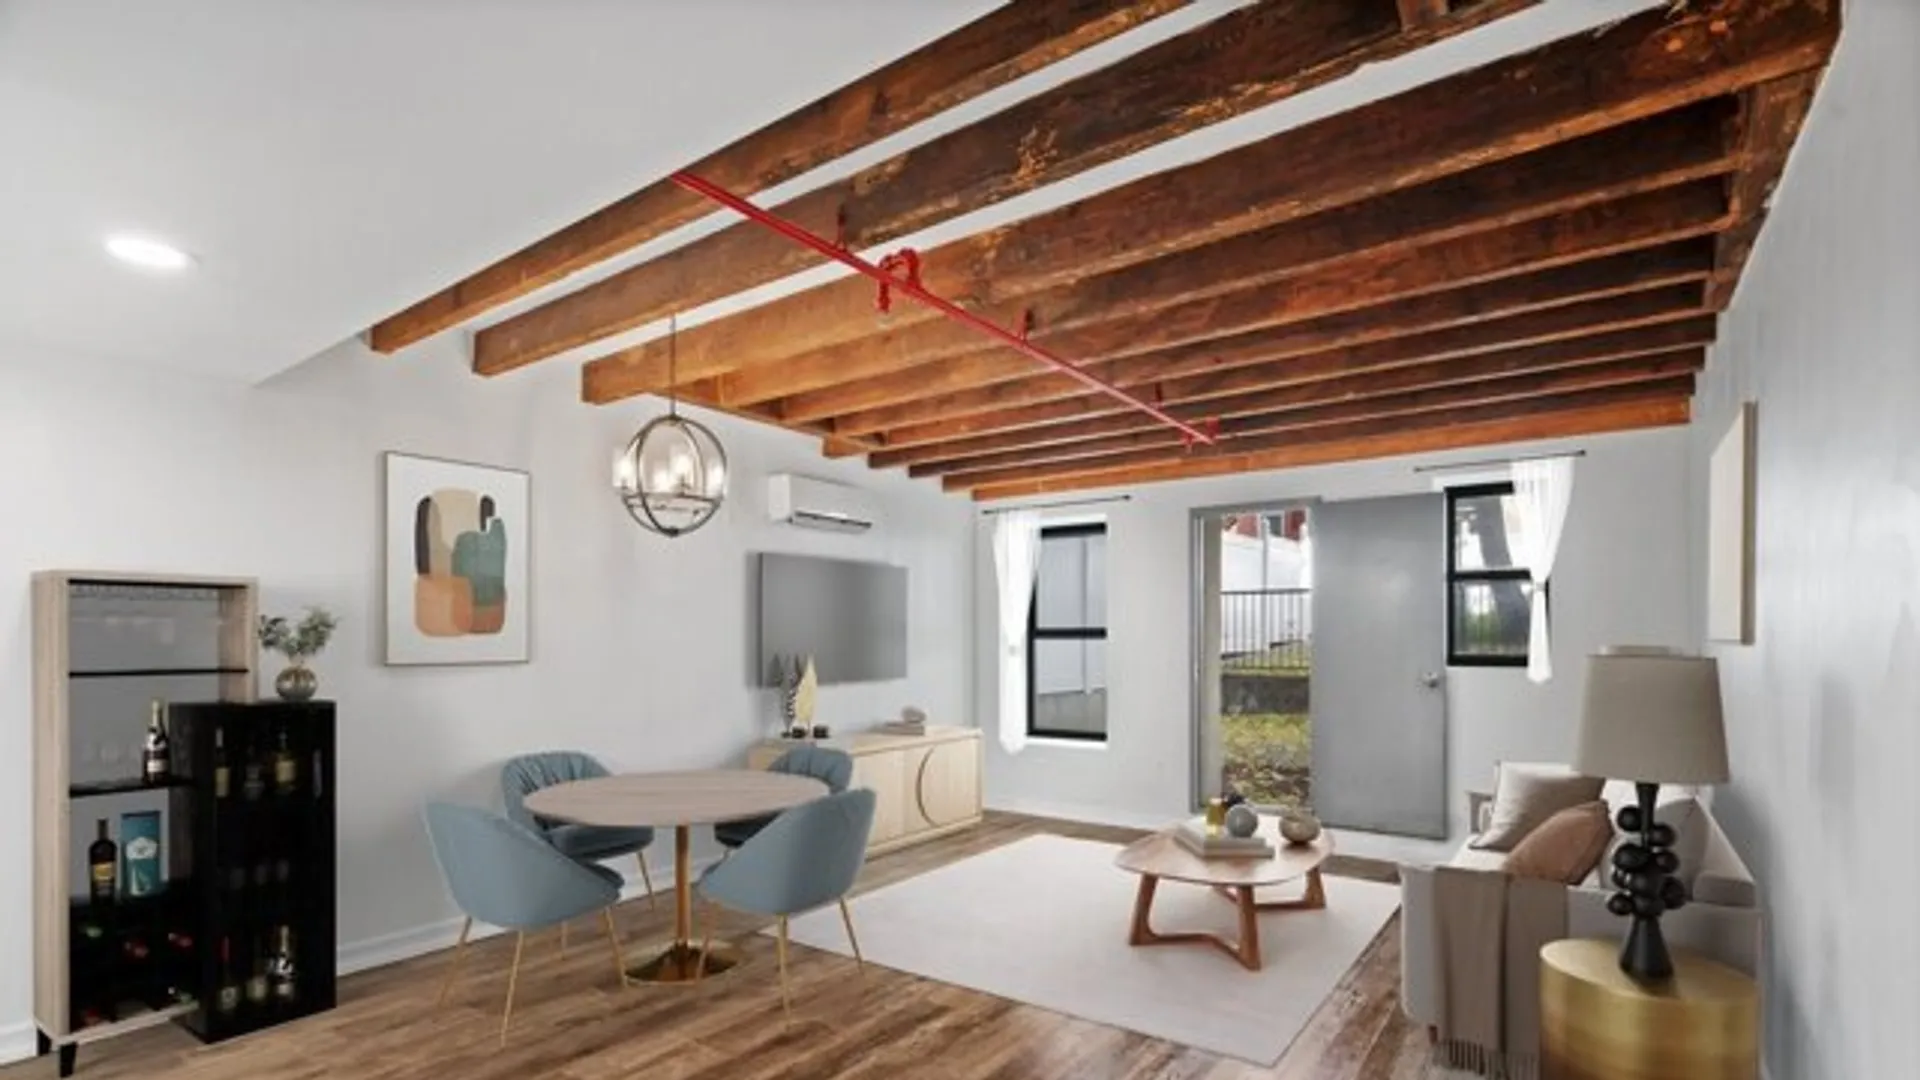 215 West 134th Street, New York, NY 10030, USA | 1 bed house for rent